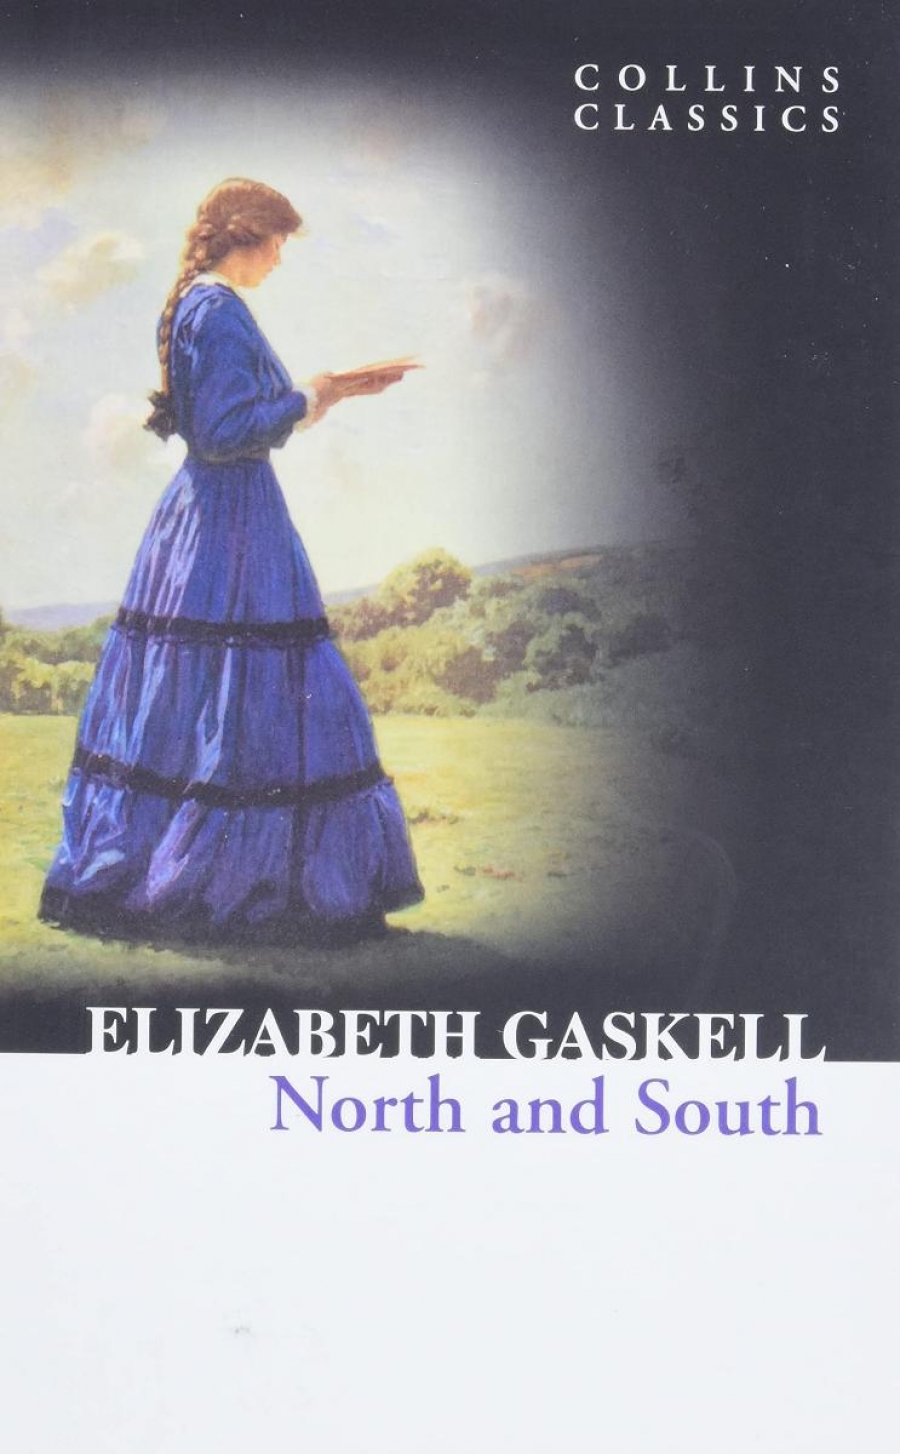 Elizabeth, Gaskell North and South 